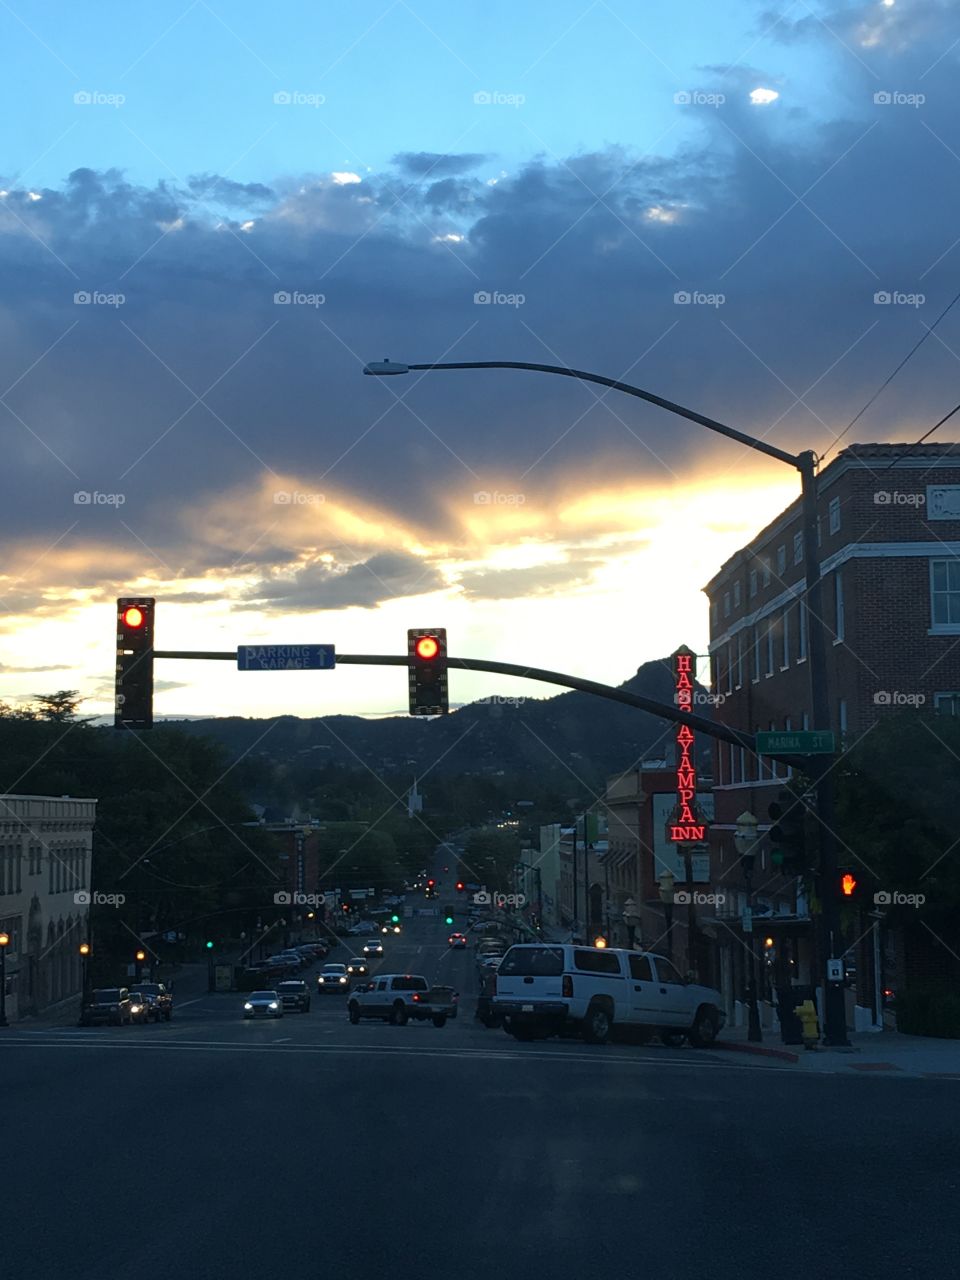 Traffic light
Sunset
Small town
View
